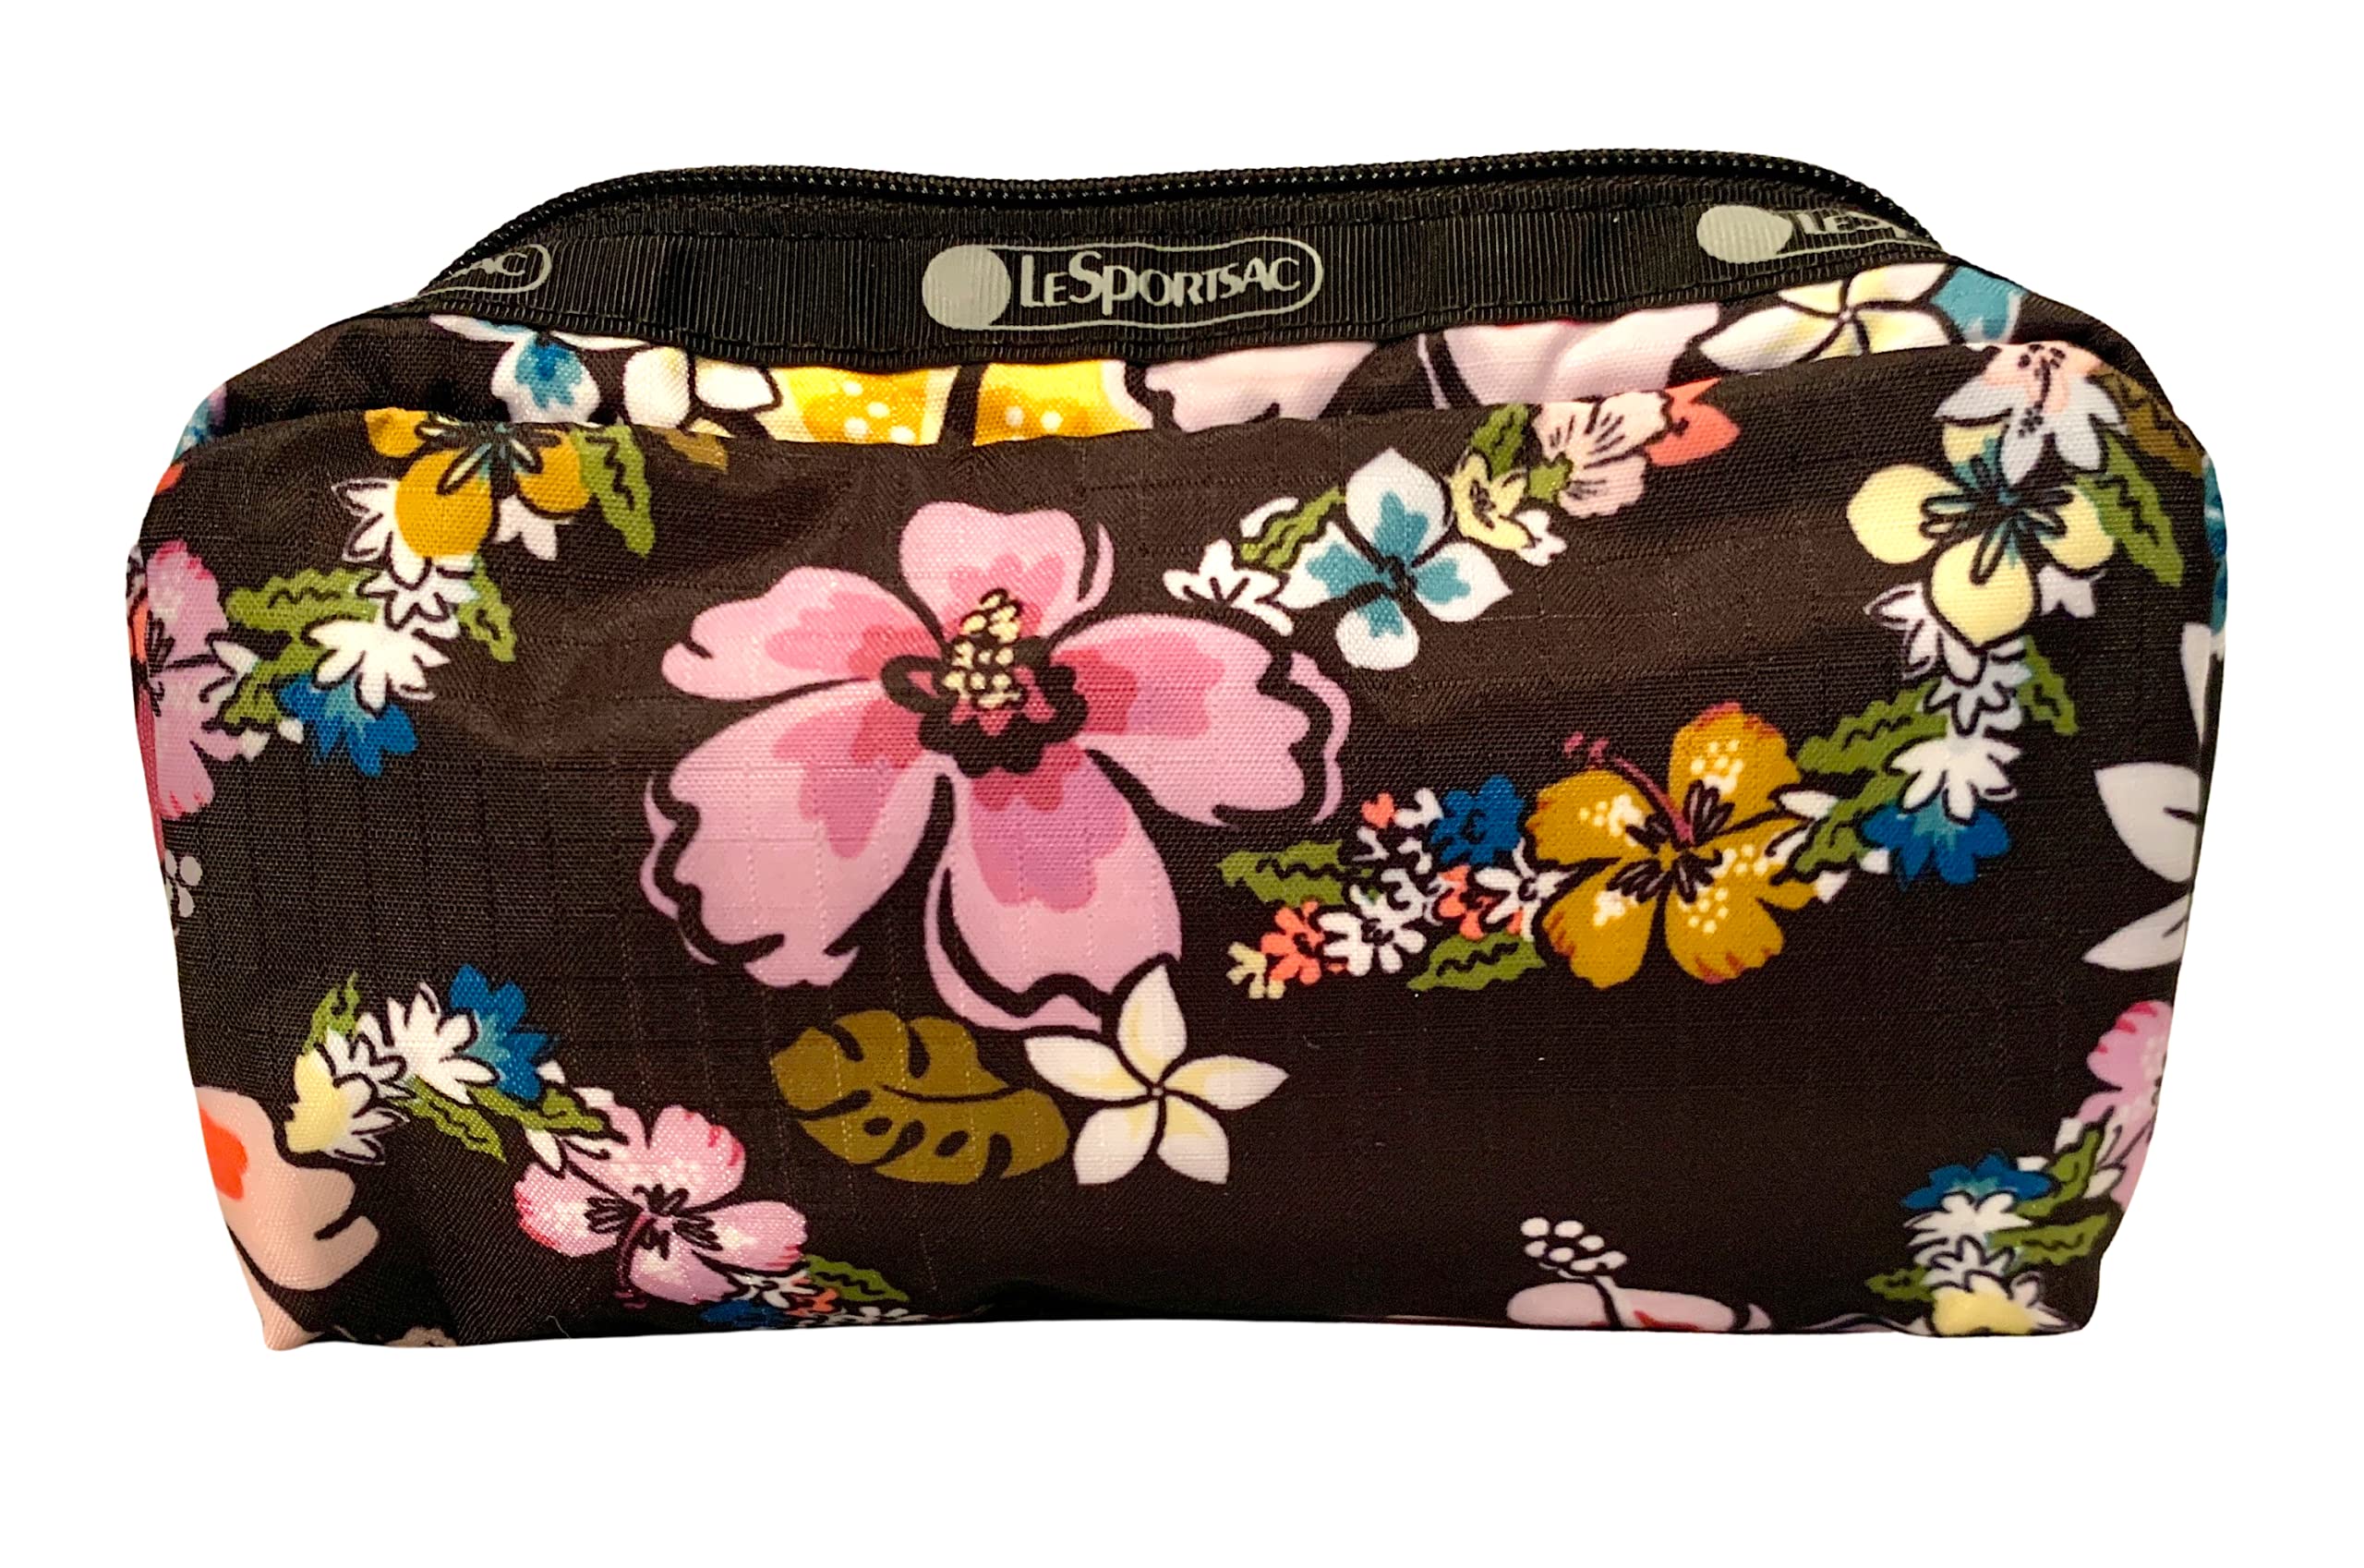 LeSportsac Olina HAWAII EXCLUSIVE Rectangular Cosmetic Bag/Pouch Style 6511/Color K530, Joyous and Colorful Tropical Lei Flowers - Aloha & Hawaii P...